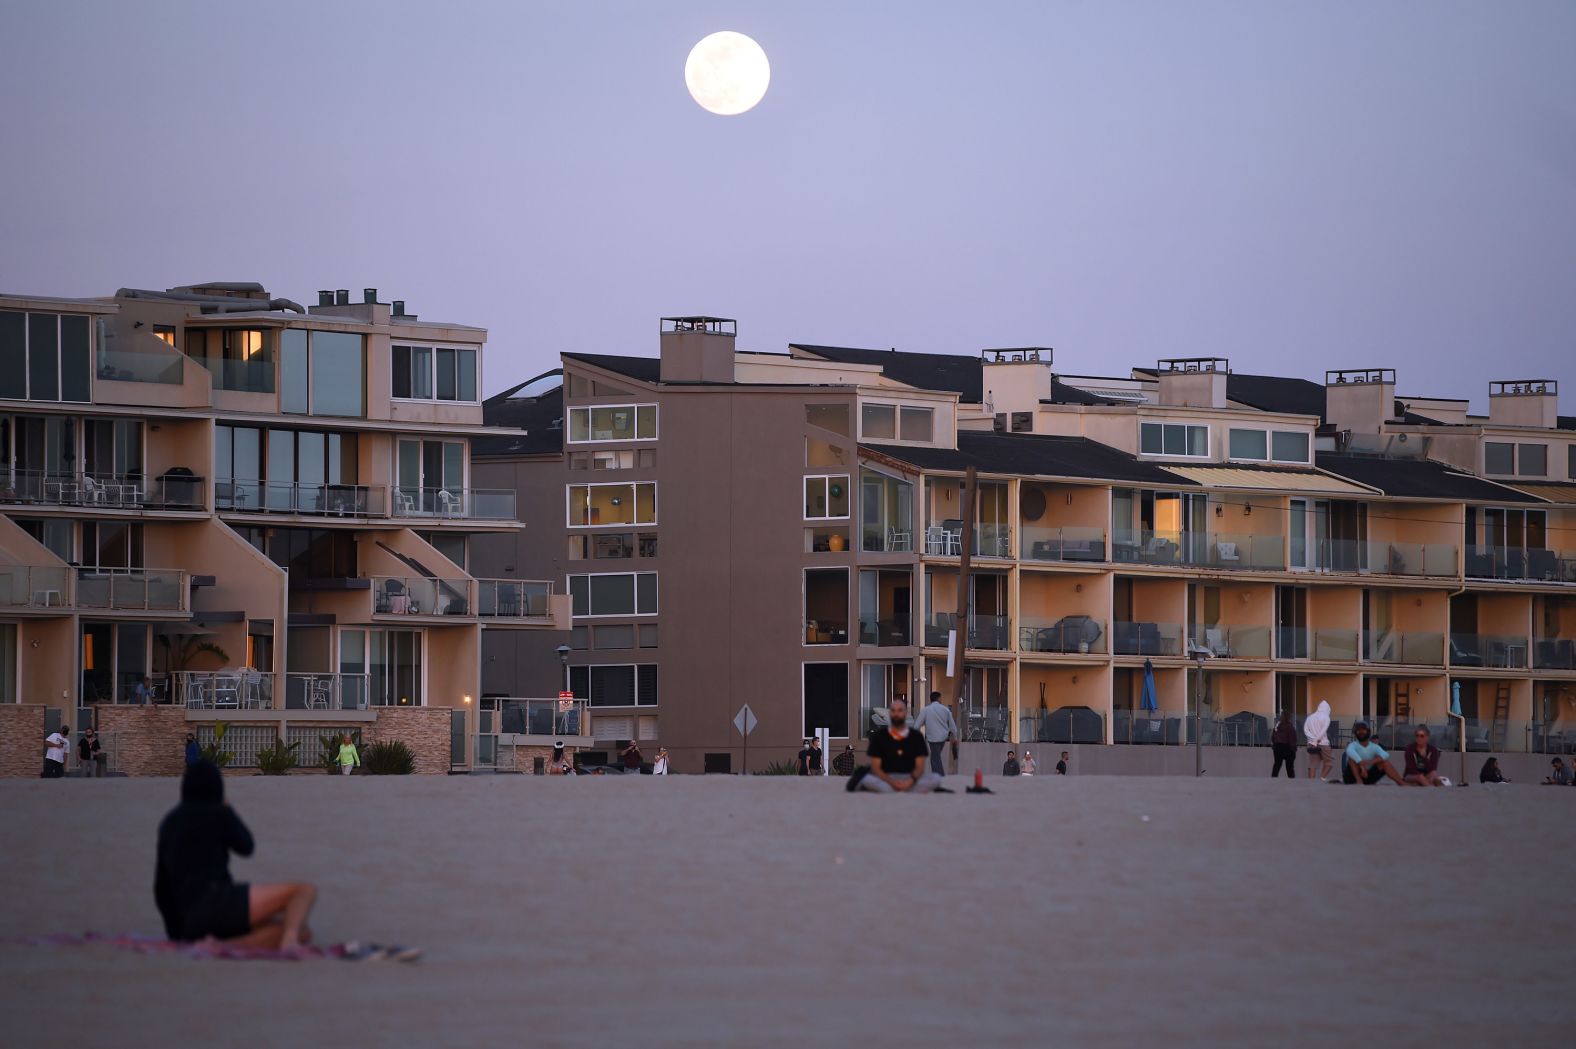 The moon rises above homes in Venice Beach, California.